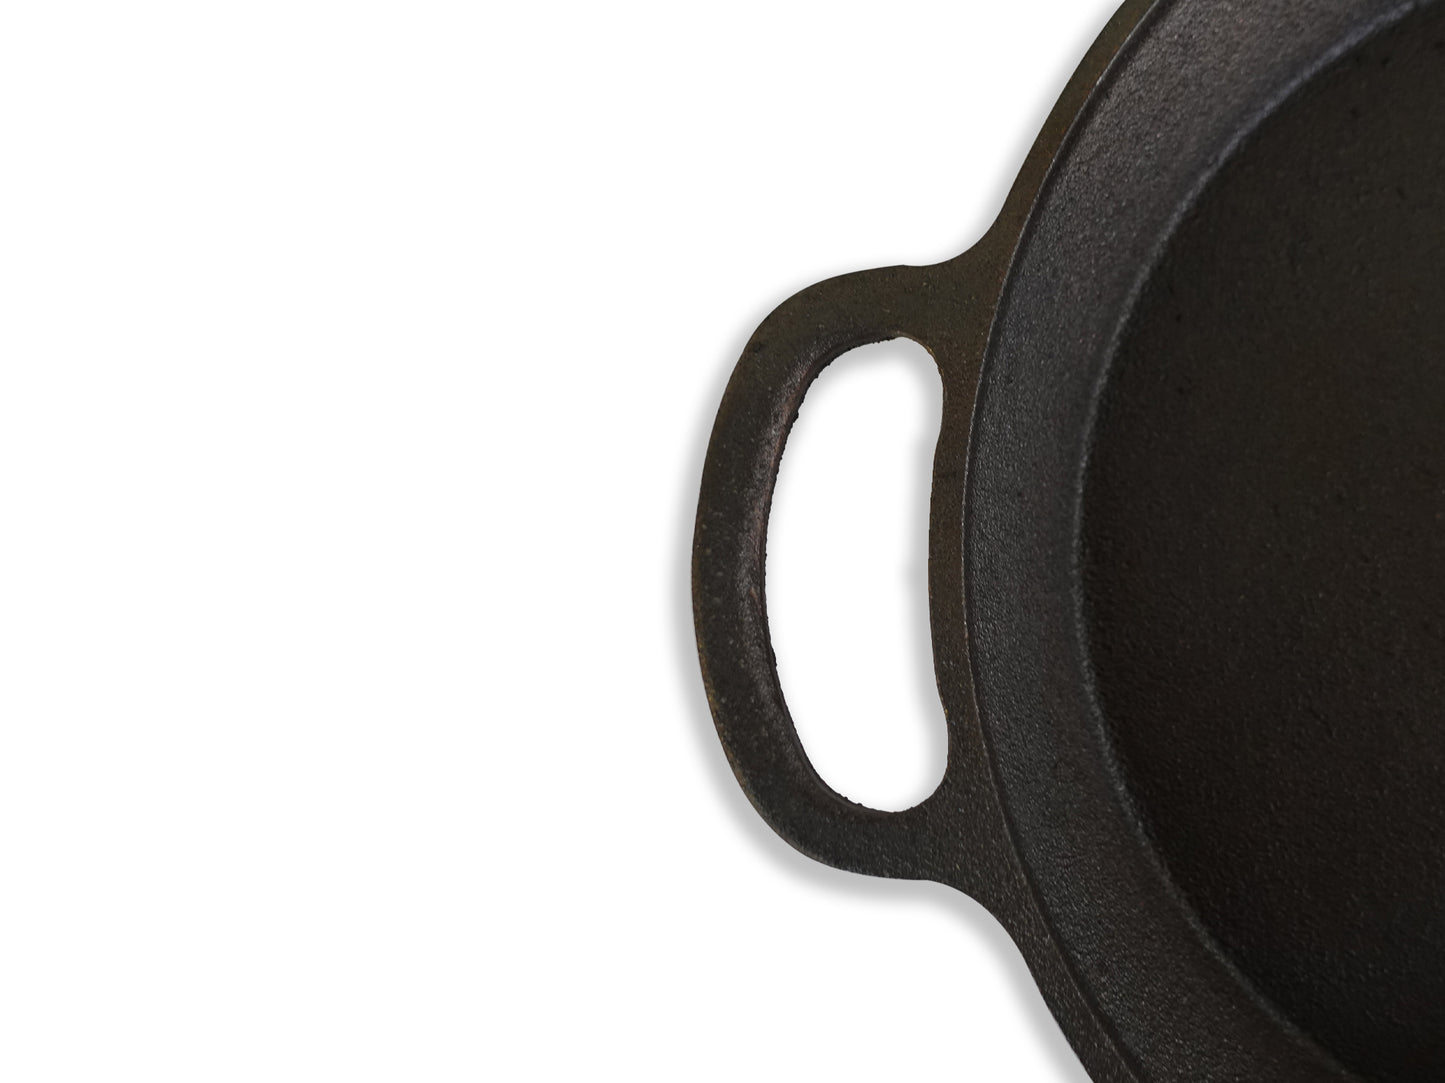 Combo Offer - 8 - Skillet - With Lid - Elevated Handle - Rosh - Modern Style & Double Handle - Grinded .